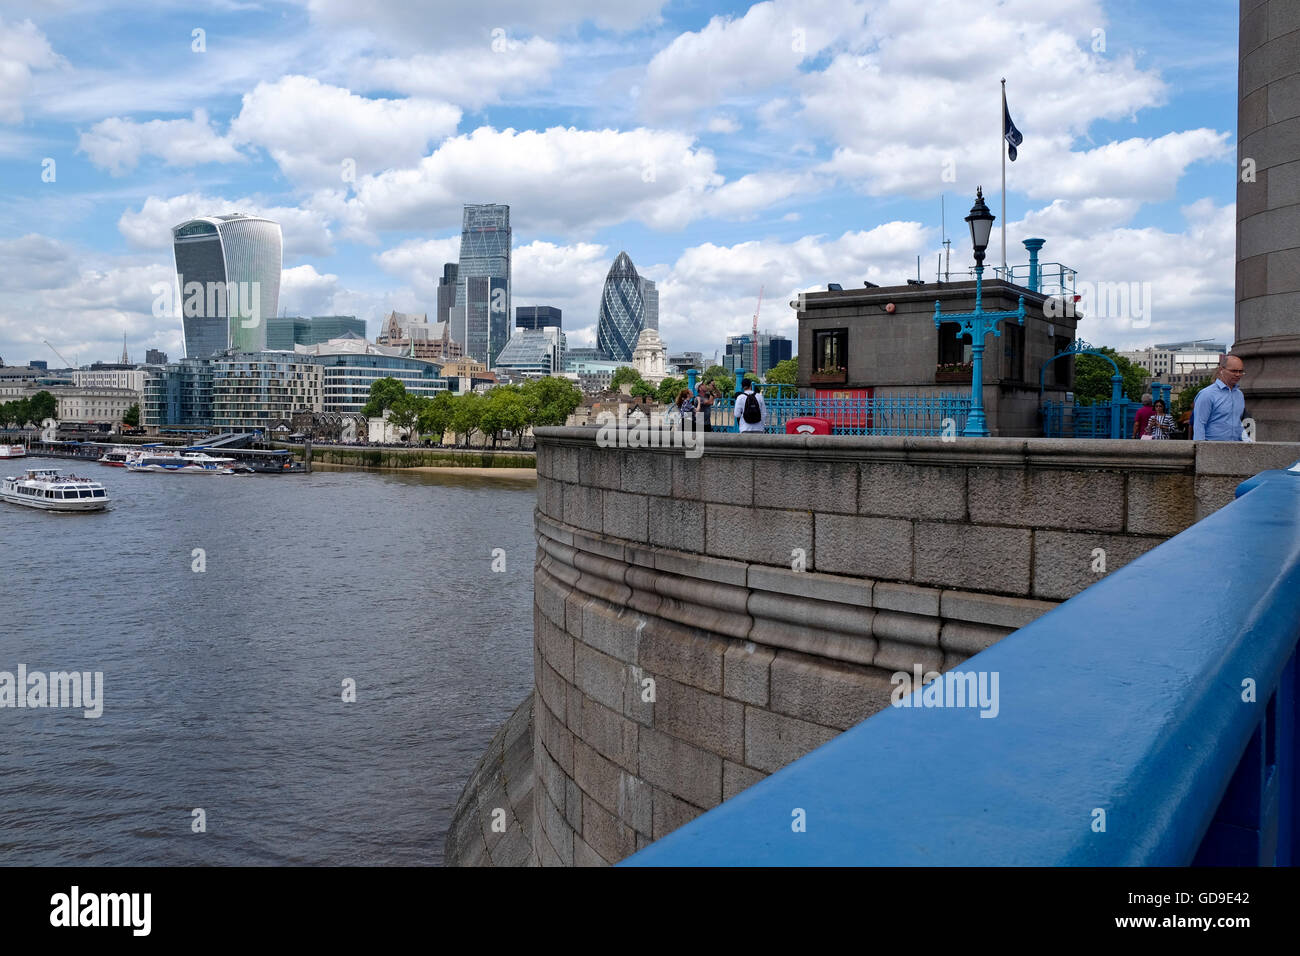 The London skyline with 'The Walkie Talkie' 'The Gherkin' and 'The Cheese Grater' London landmark taken from Tower Bridge London over the Thames River Stock Photo